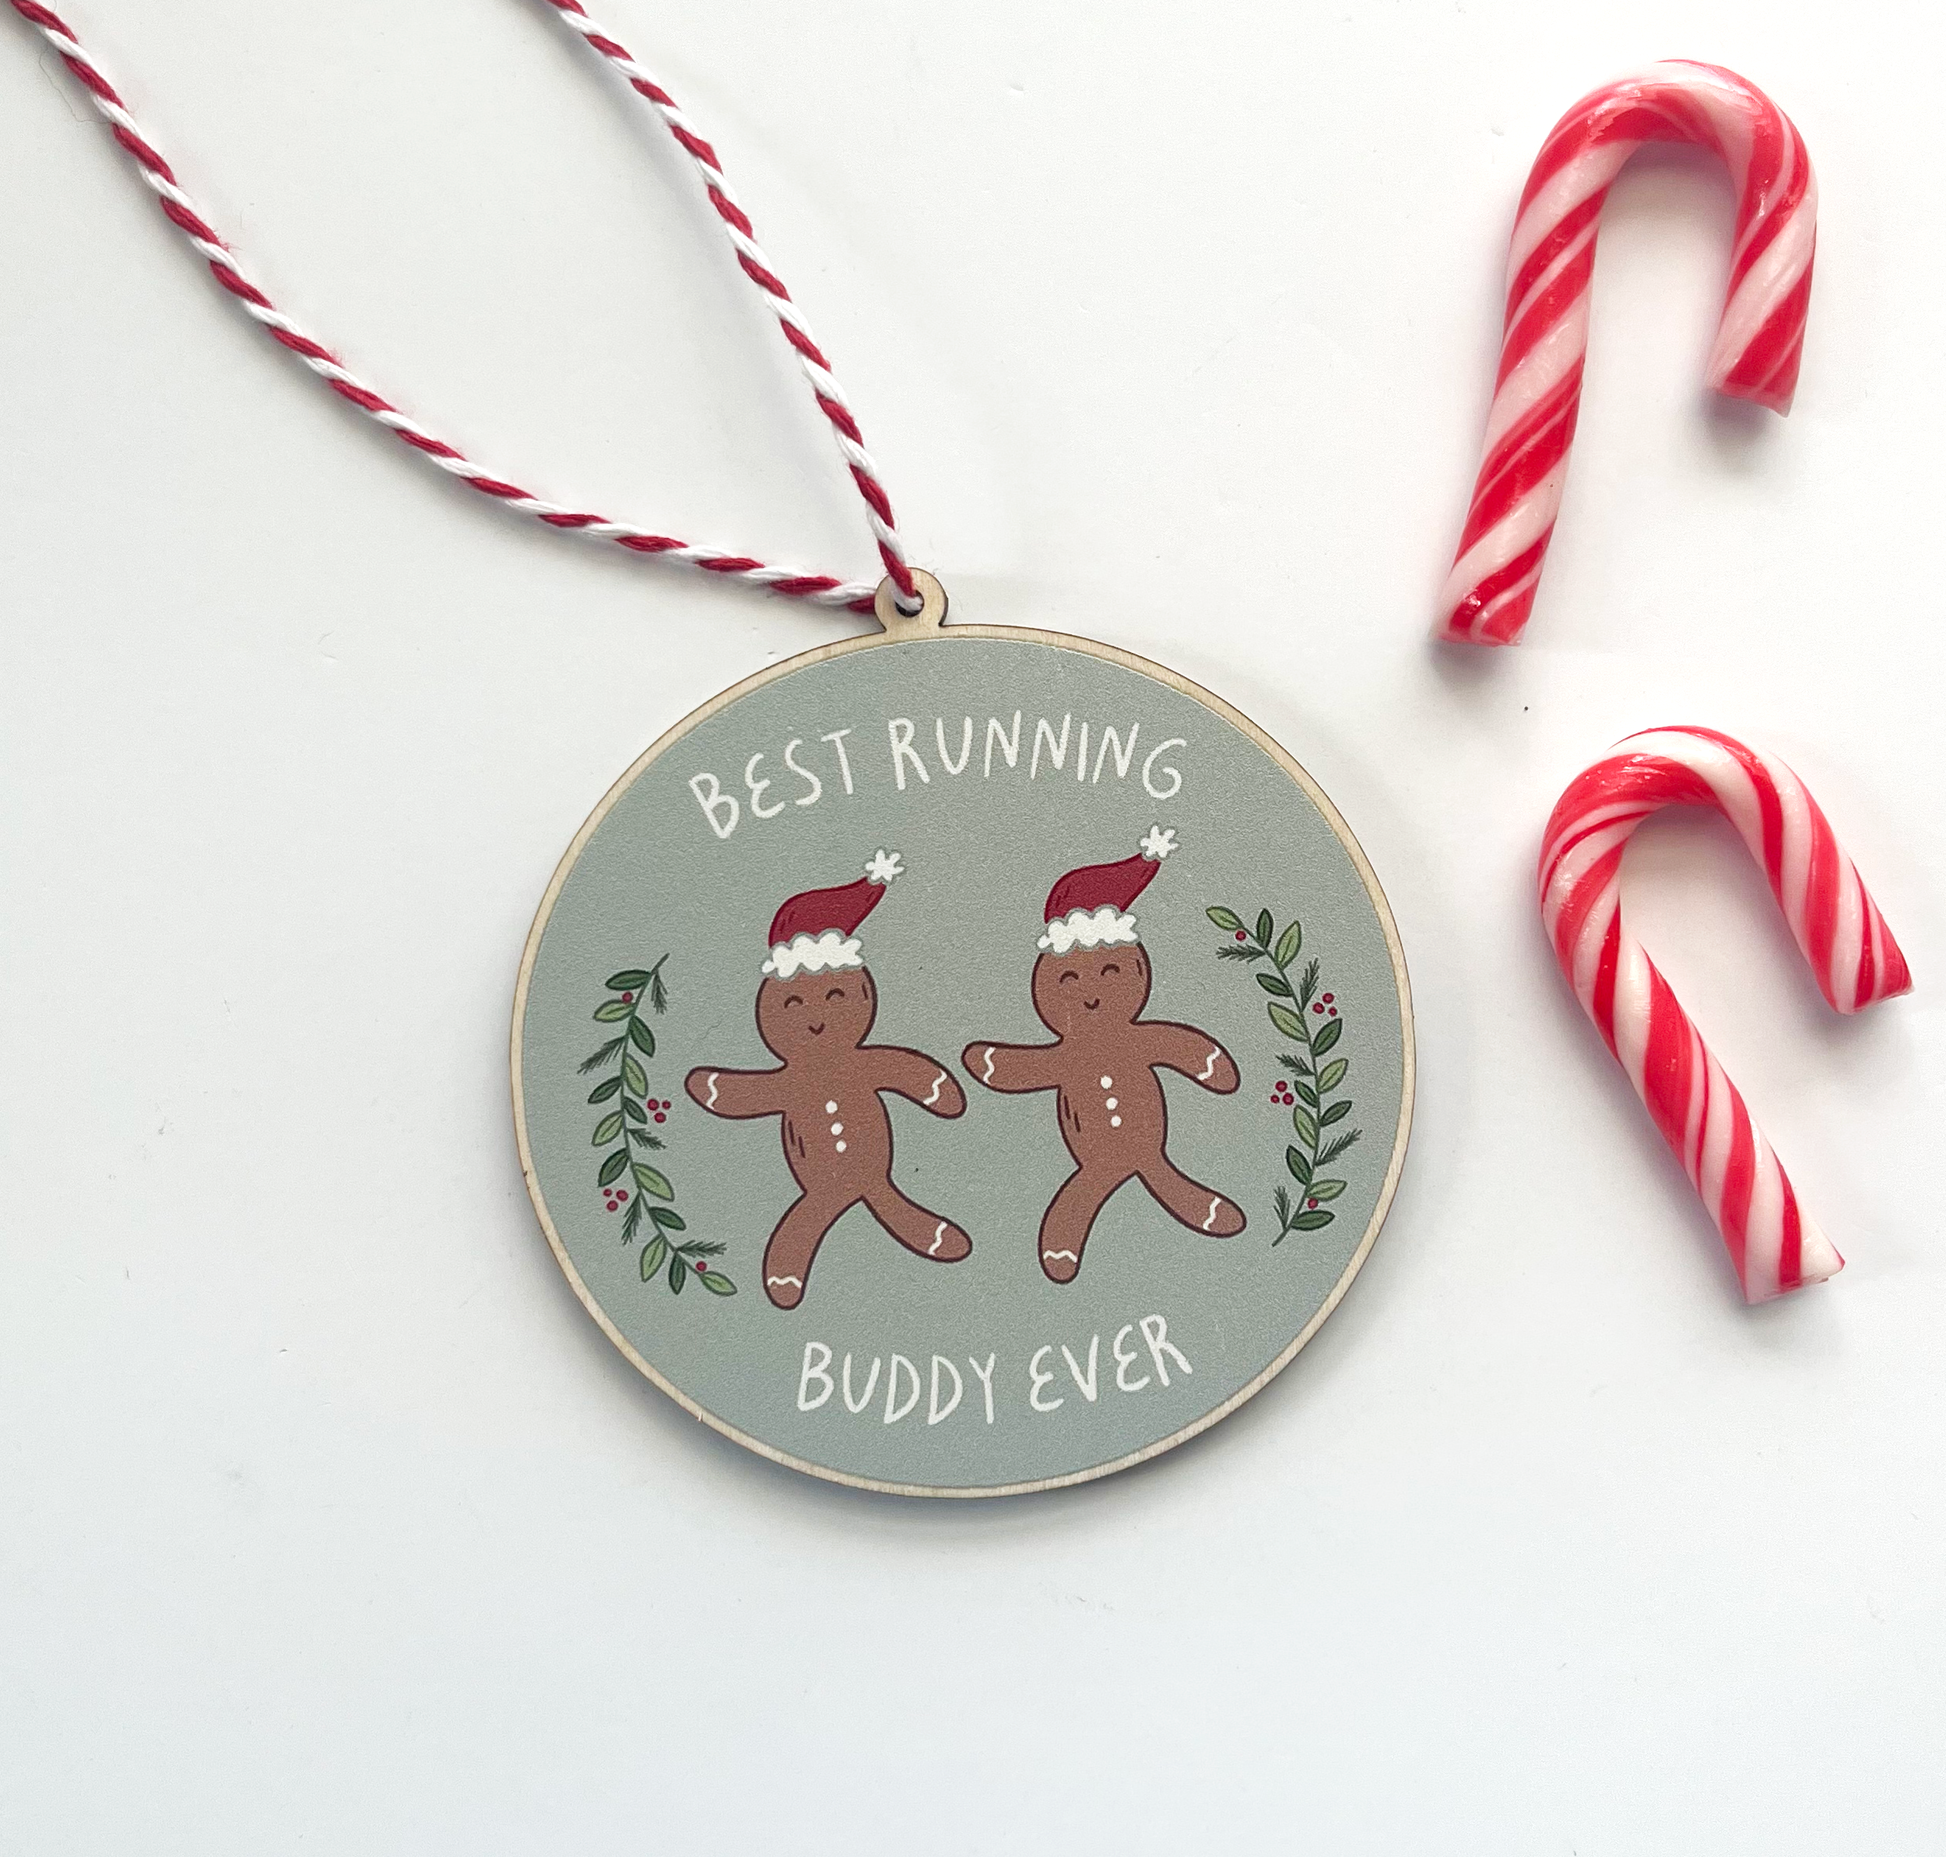 Running buddy ornament with candy canes